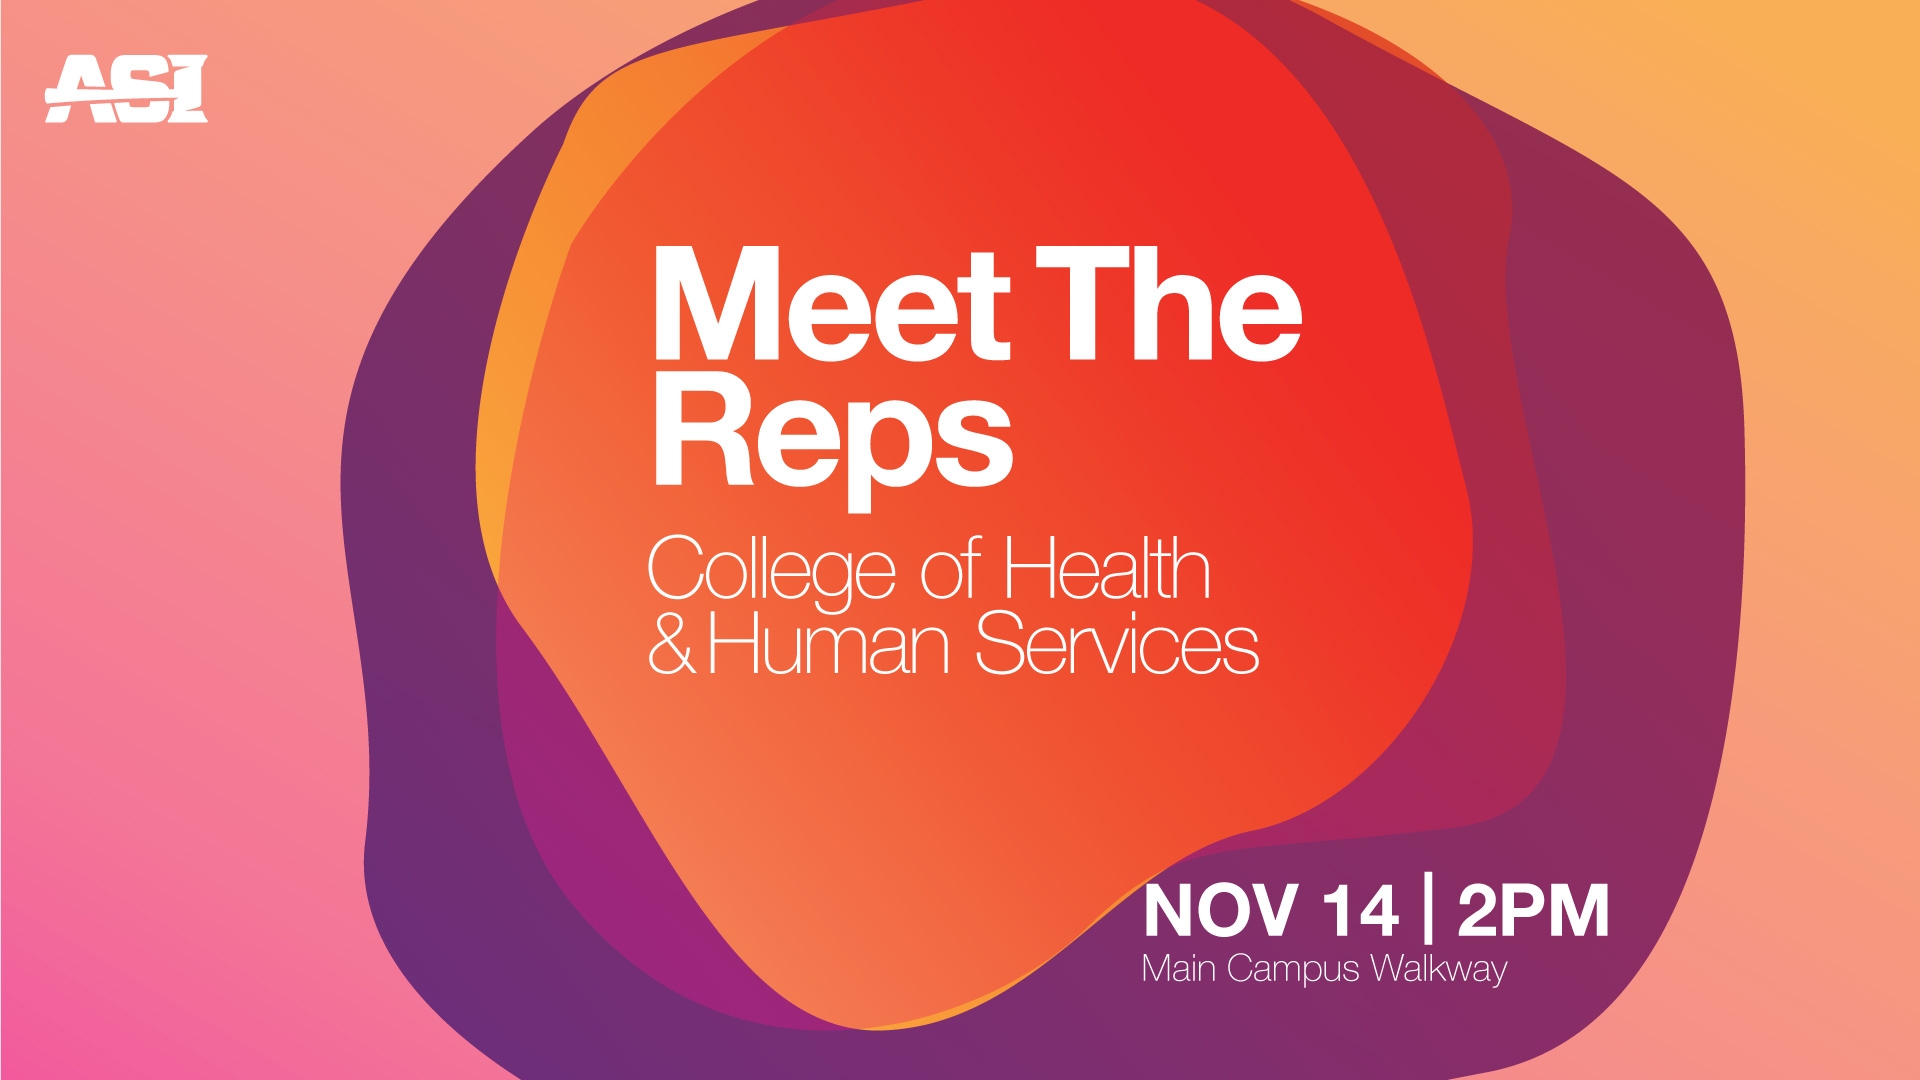 Meet the Reps: Health and Human Services College